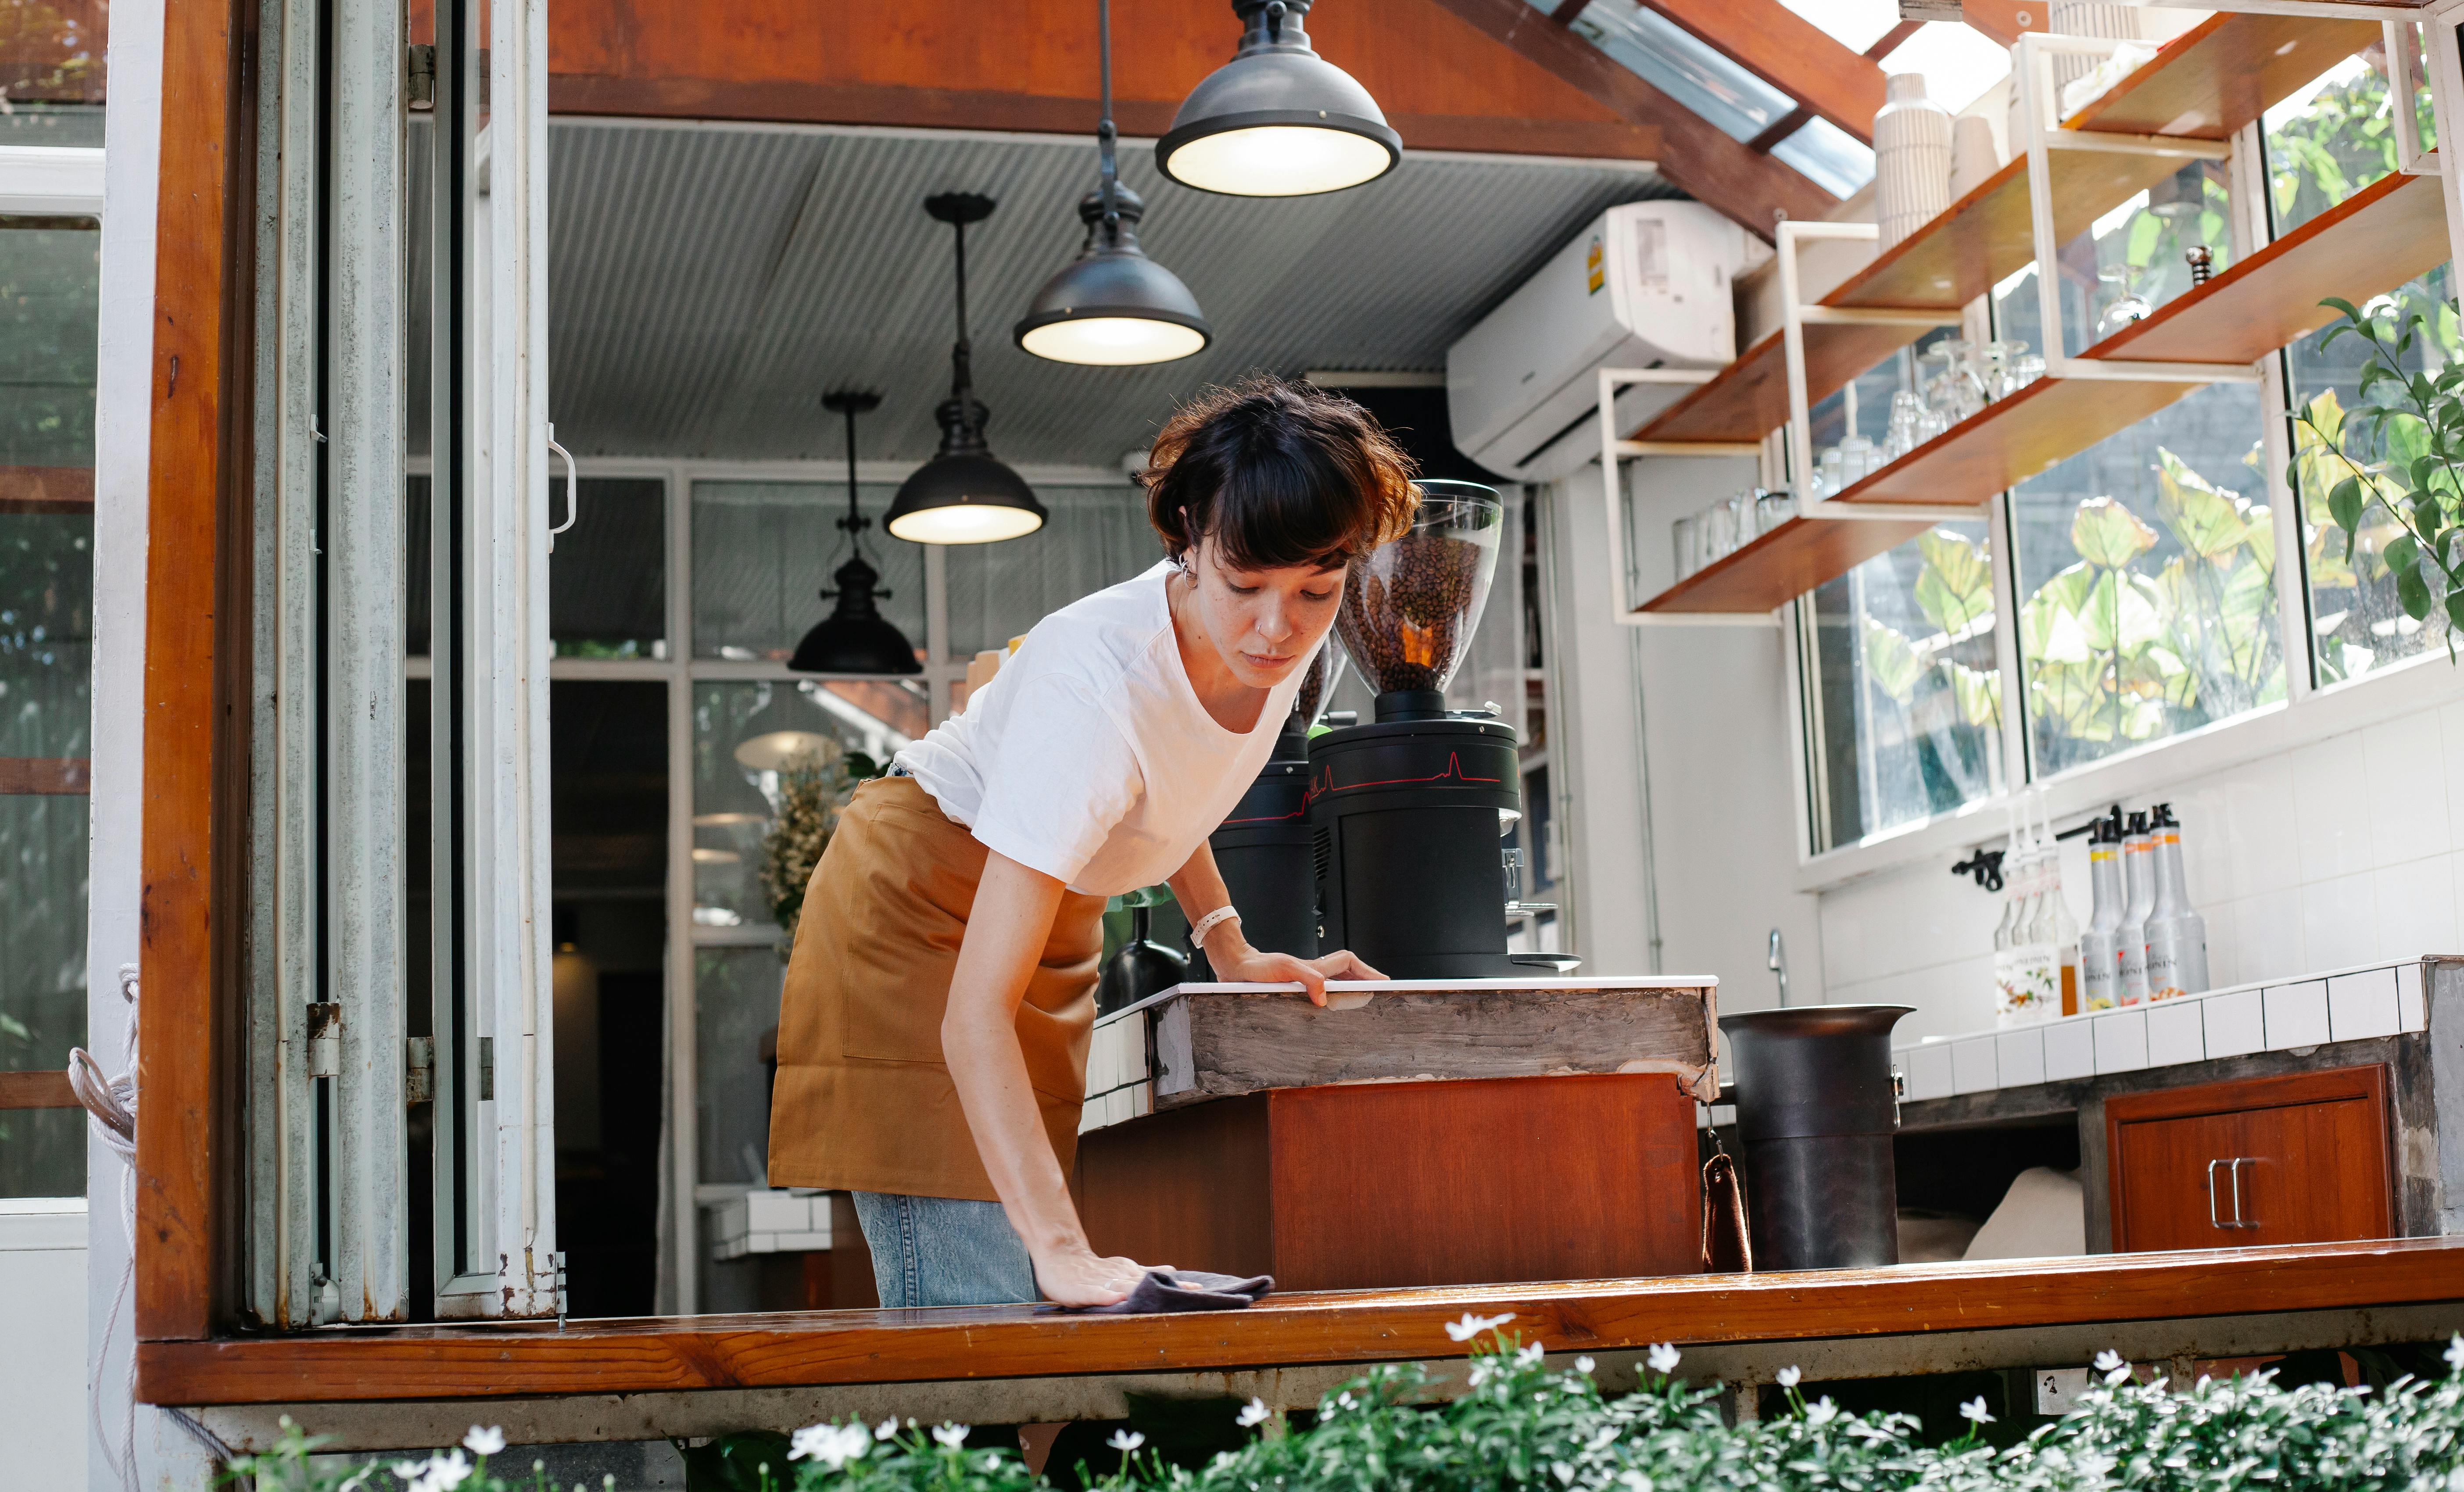 A young woman cleaning a table in a cafe